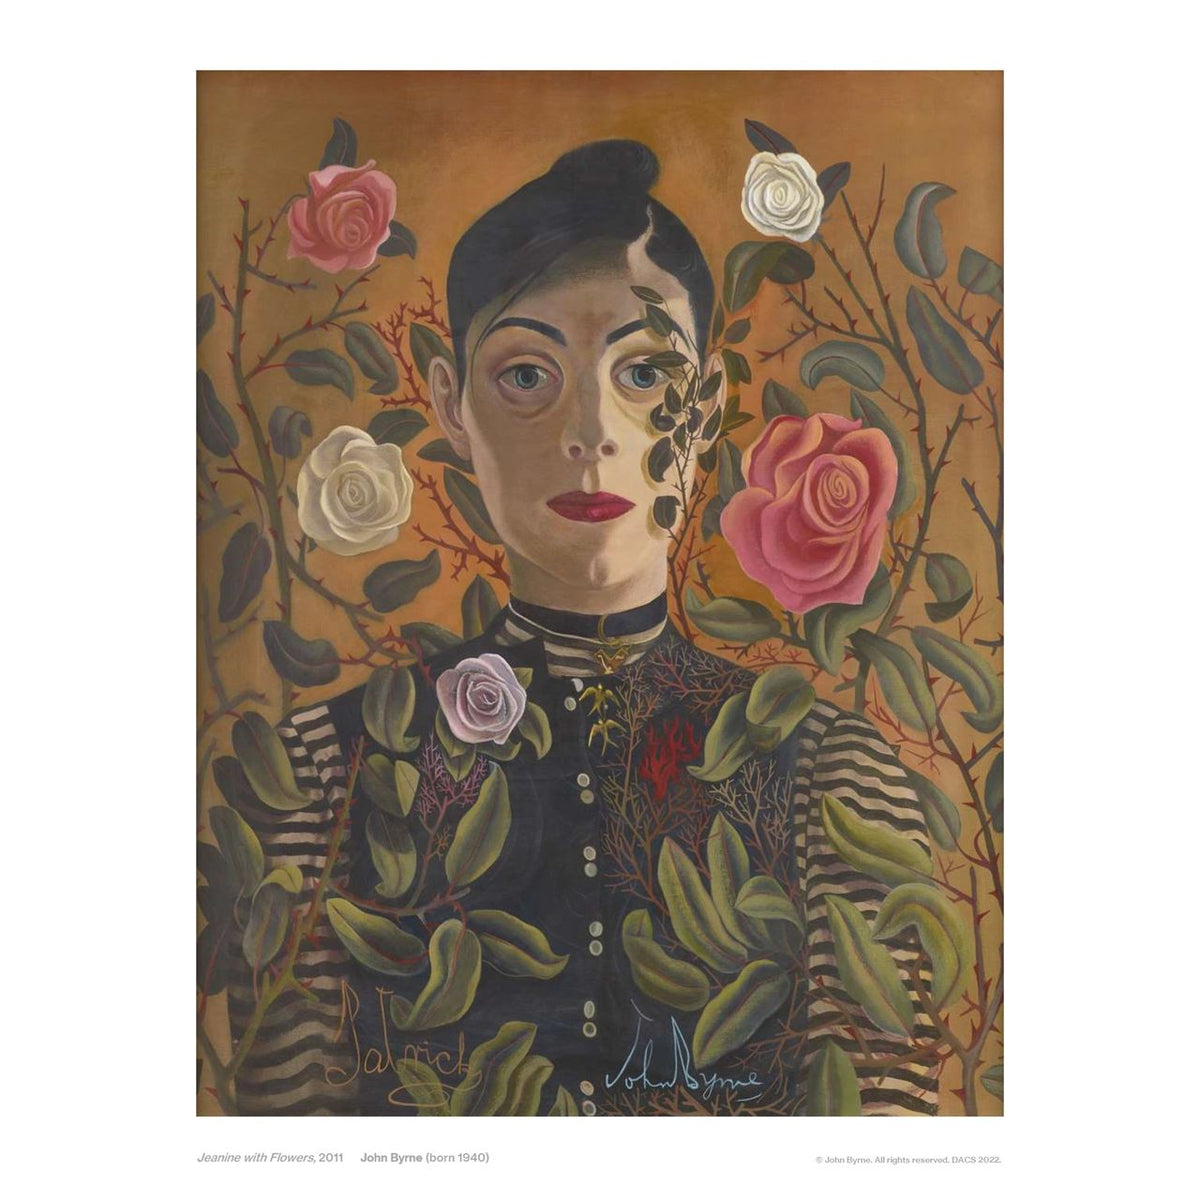 John Byrne: Jeanine with Flowers Limited Edition Print